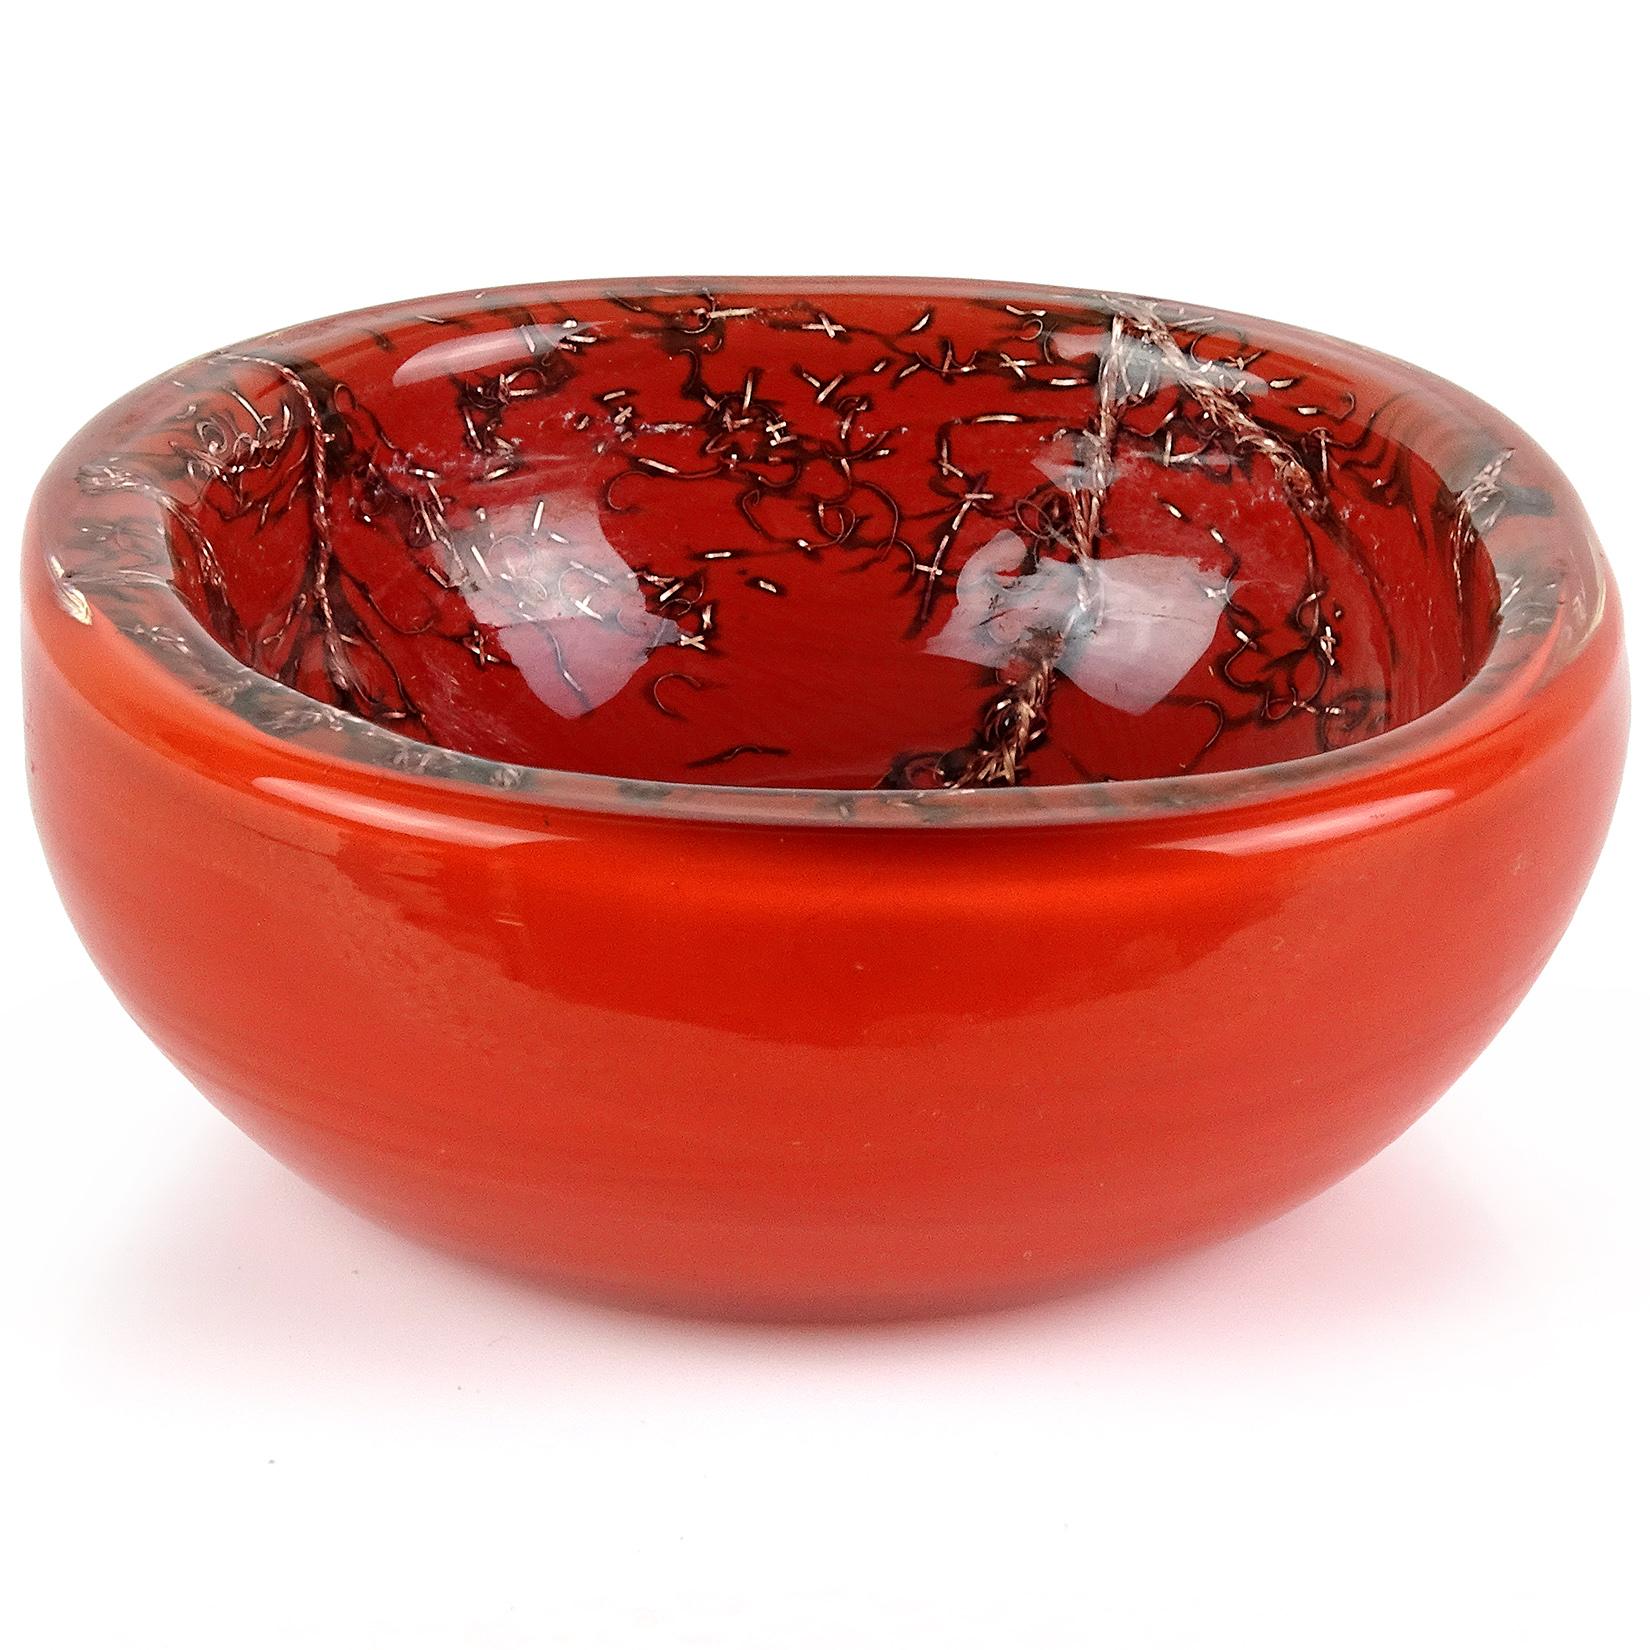 Beautiful and rare vintage Murano hand blown coral red orange with copper filaments Italian art glass bowl / ring dish. Documented to designer Toni Zuccheri for Venini, circa 1964 from the 